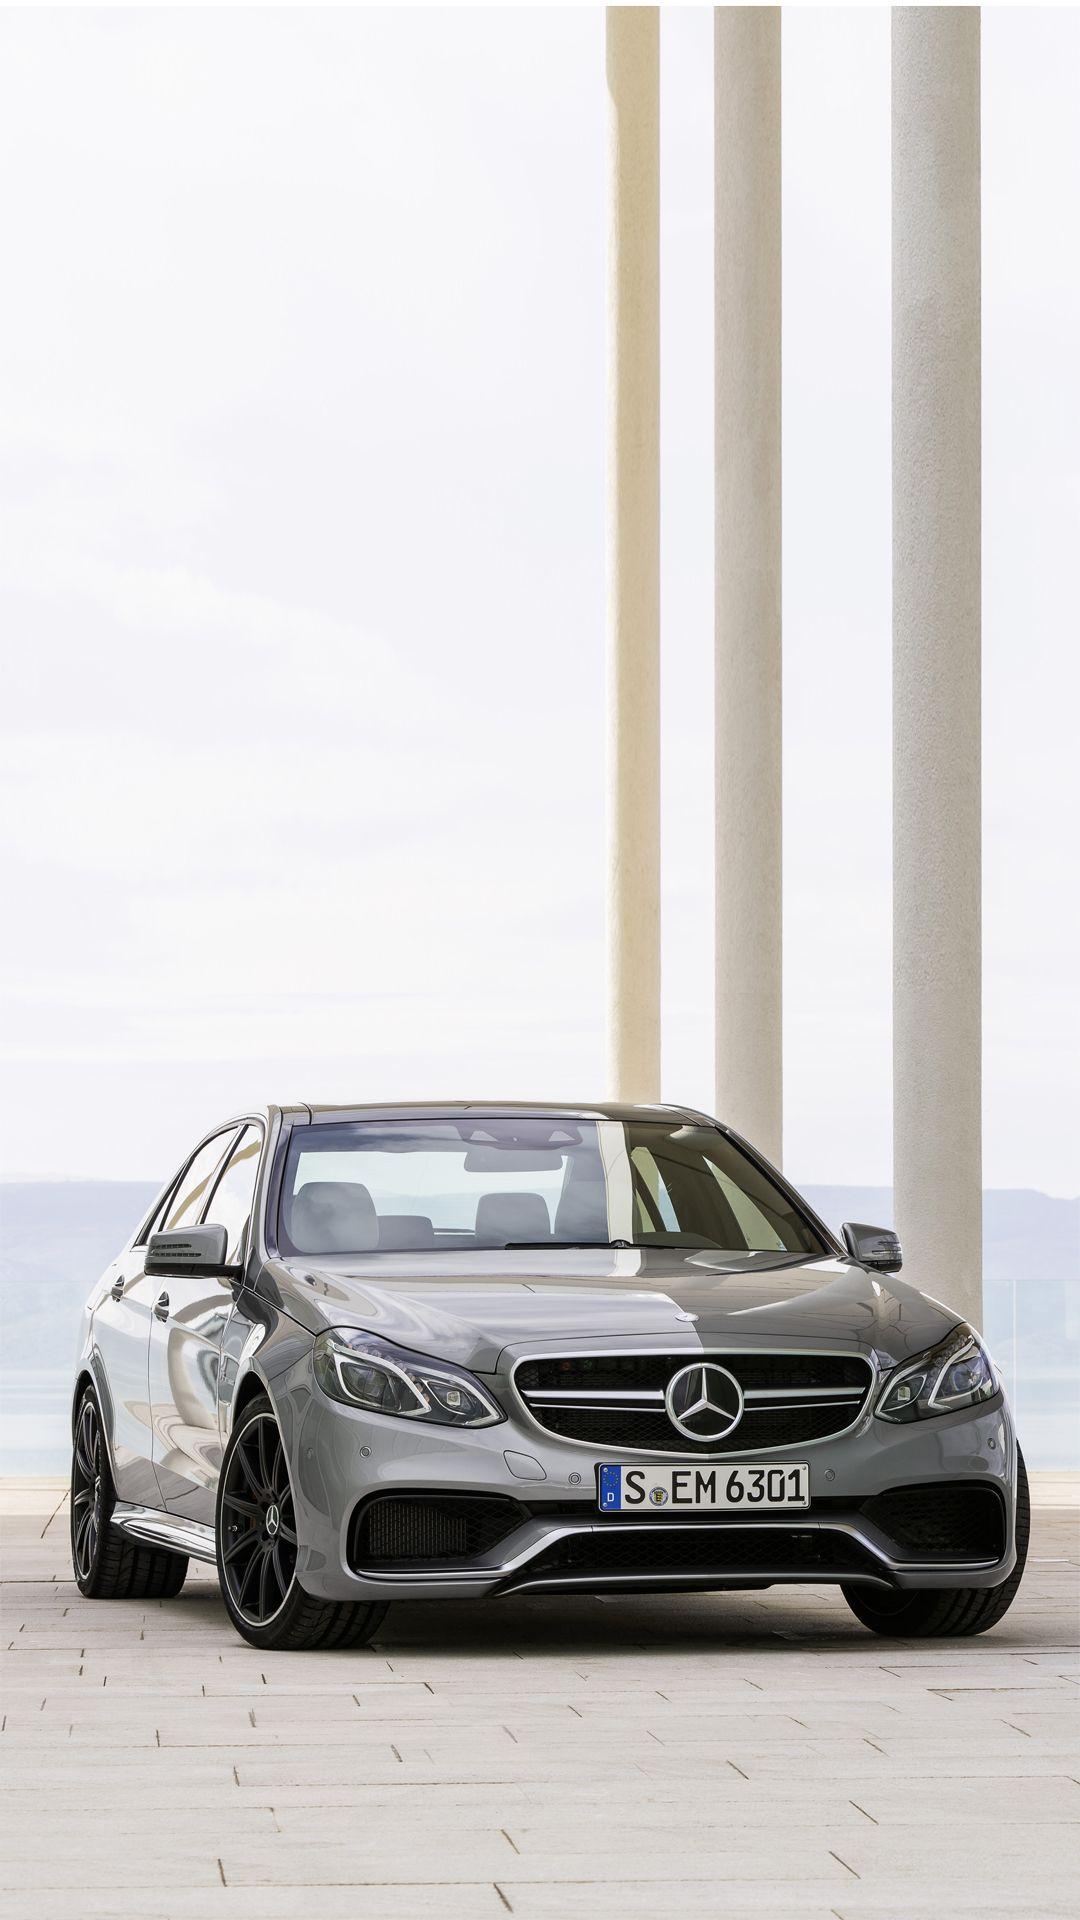 Mercedes Benz E63 AMGK Wallpaper, Free And Easy To Download